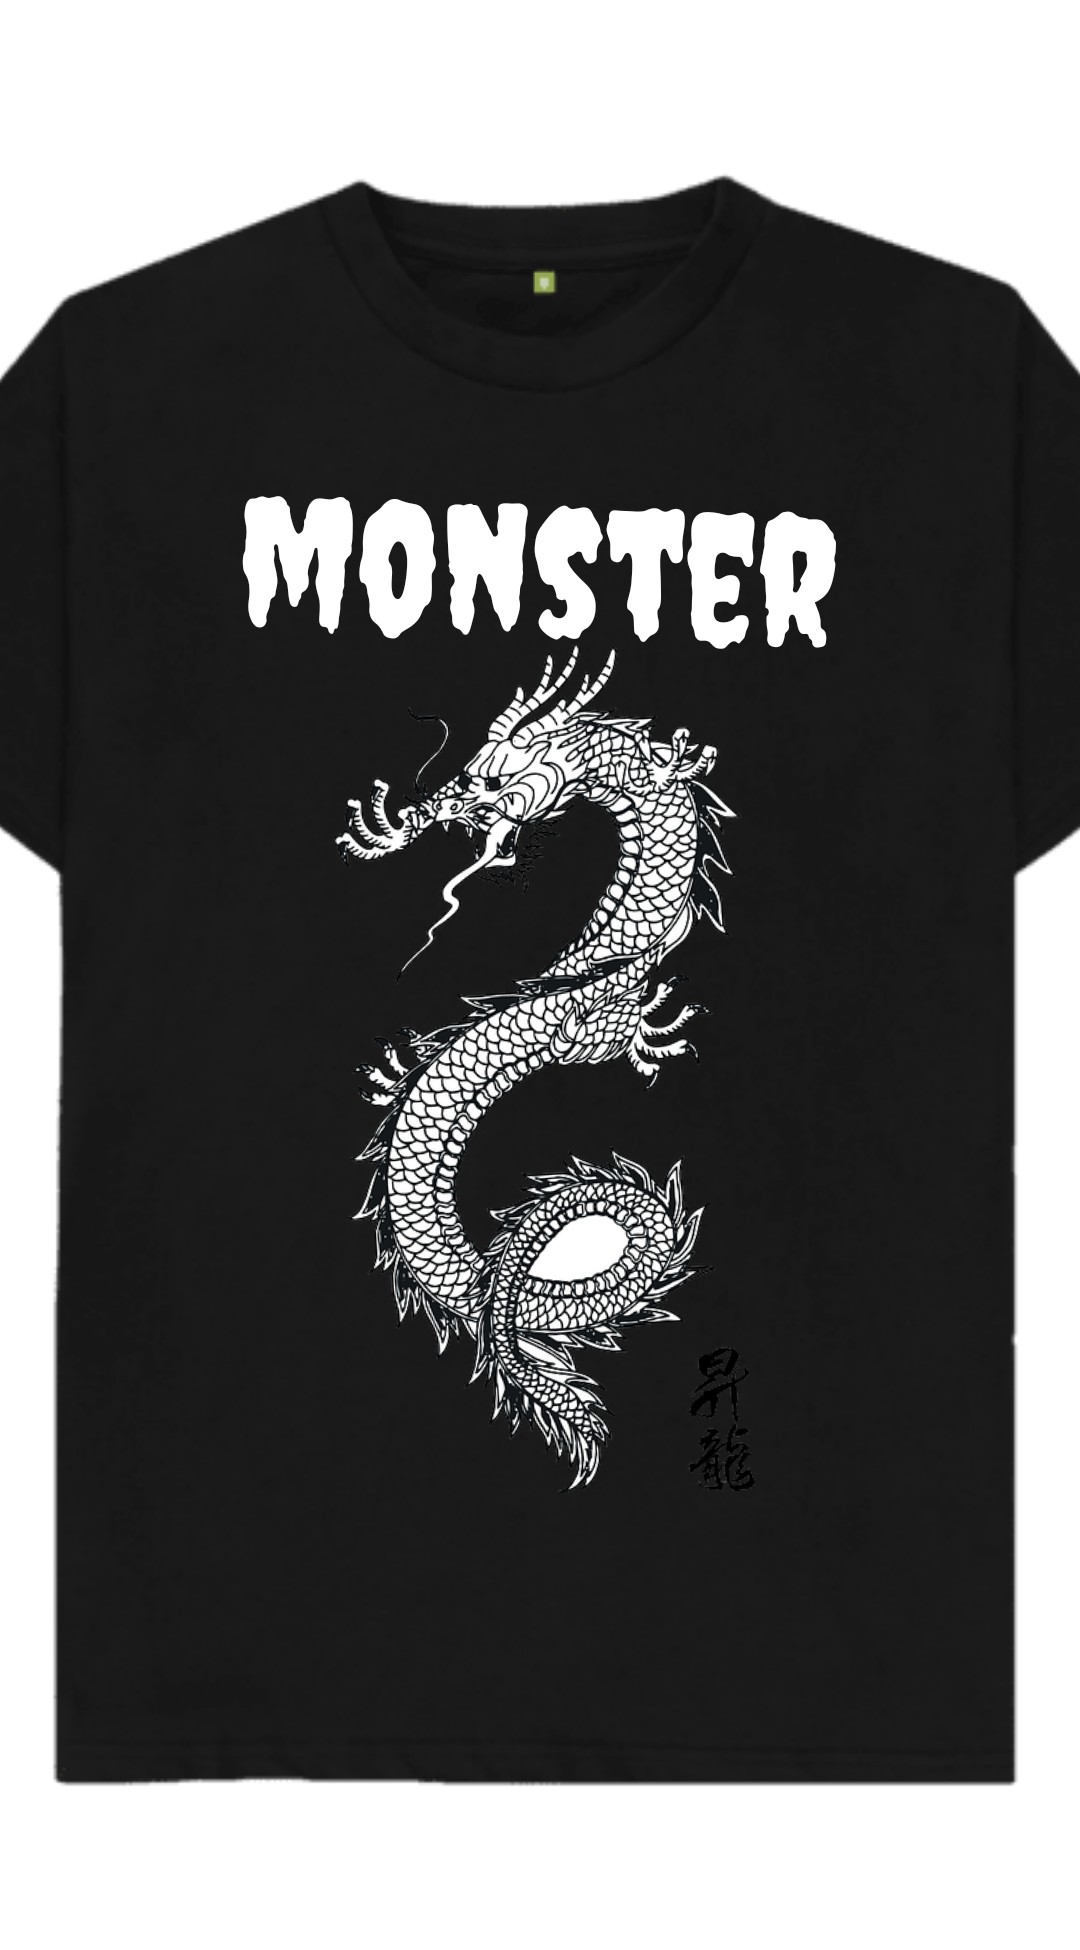 Black t - shirt with a white dragon on it.